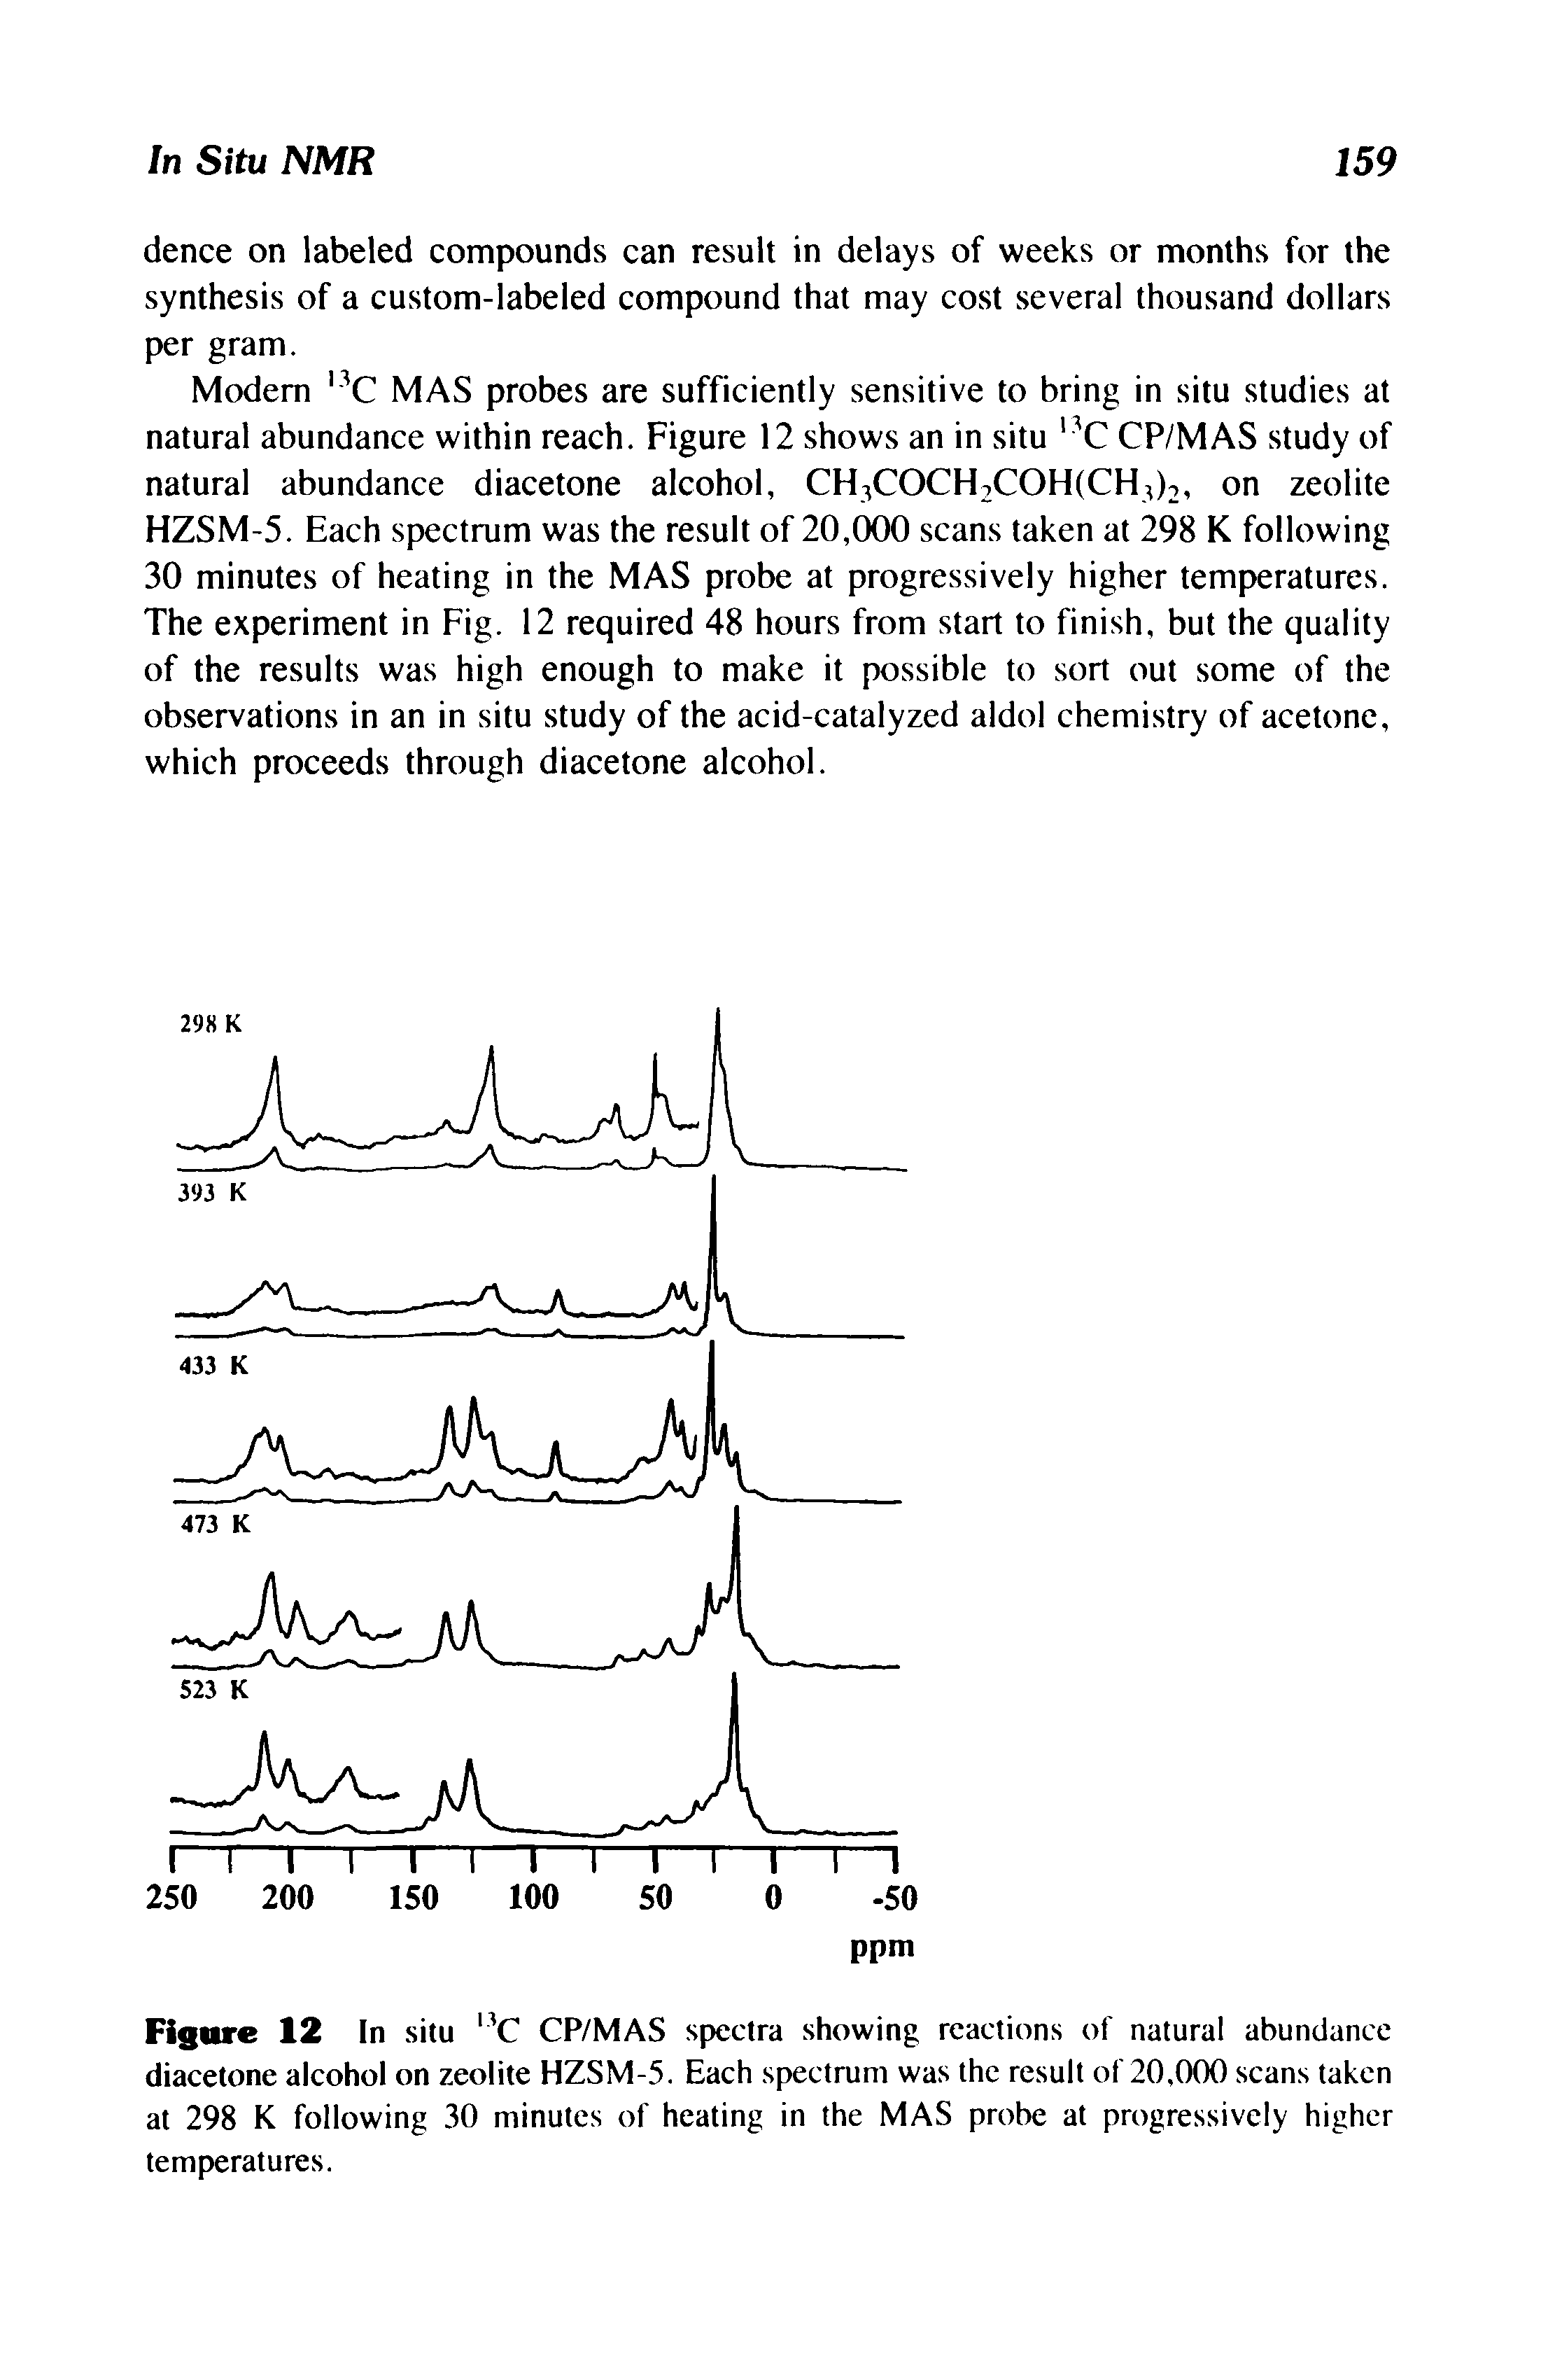 Figure 12 In situ C CP/MAS spectra showing reactions of natural abundance diacetone alcohol on zeolite HZSM-5. Each spectrum was the result of 20,000 scans taken at 298 K following 30 minutes of heating in the MAS probe at progressively higher temperatures.